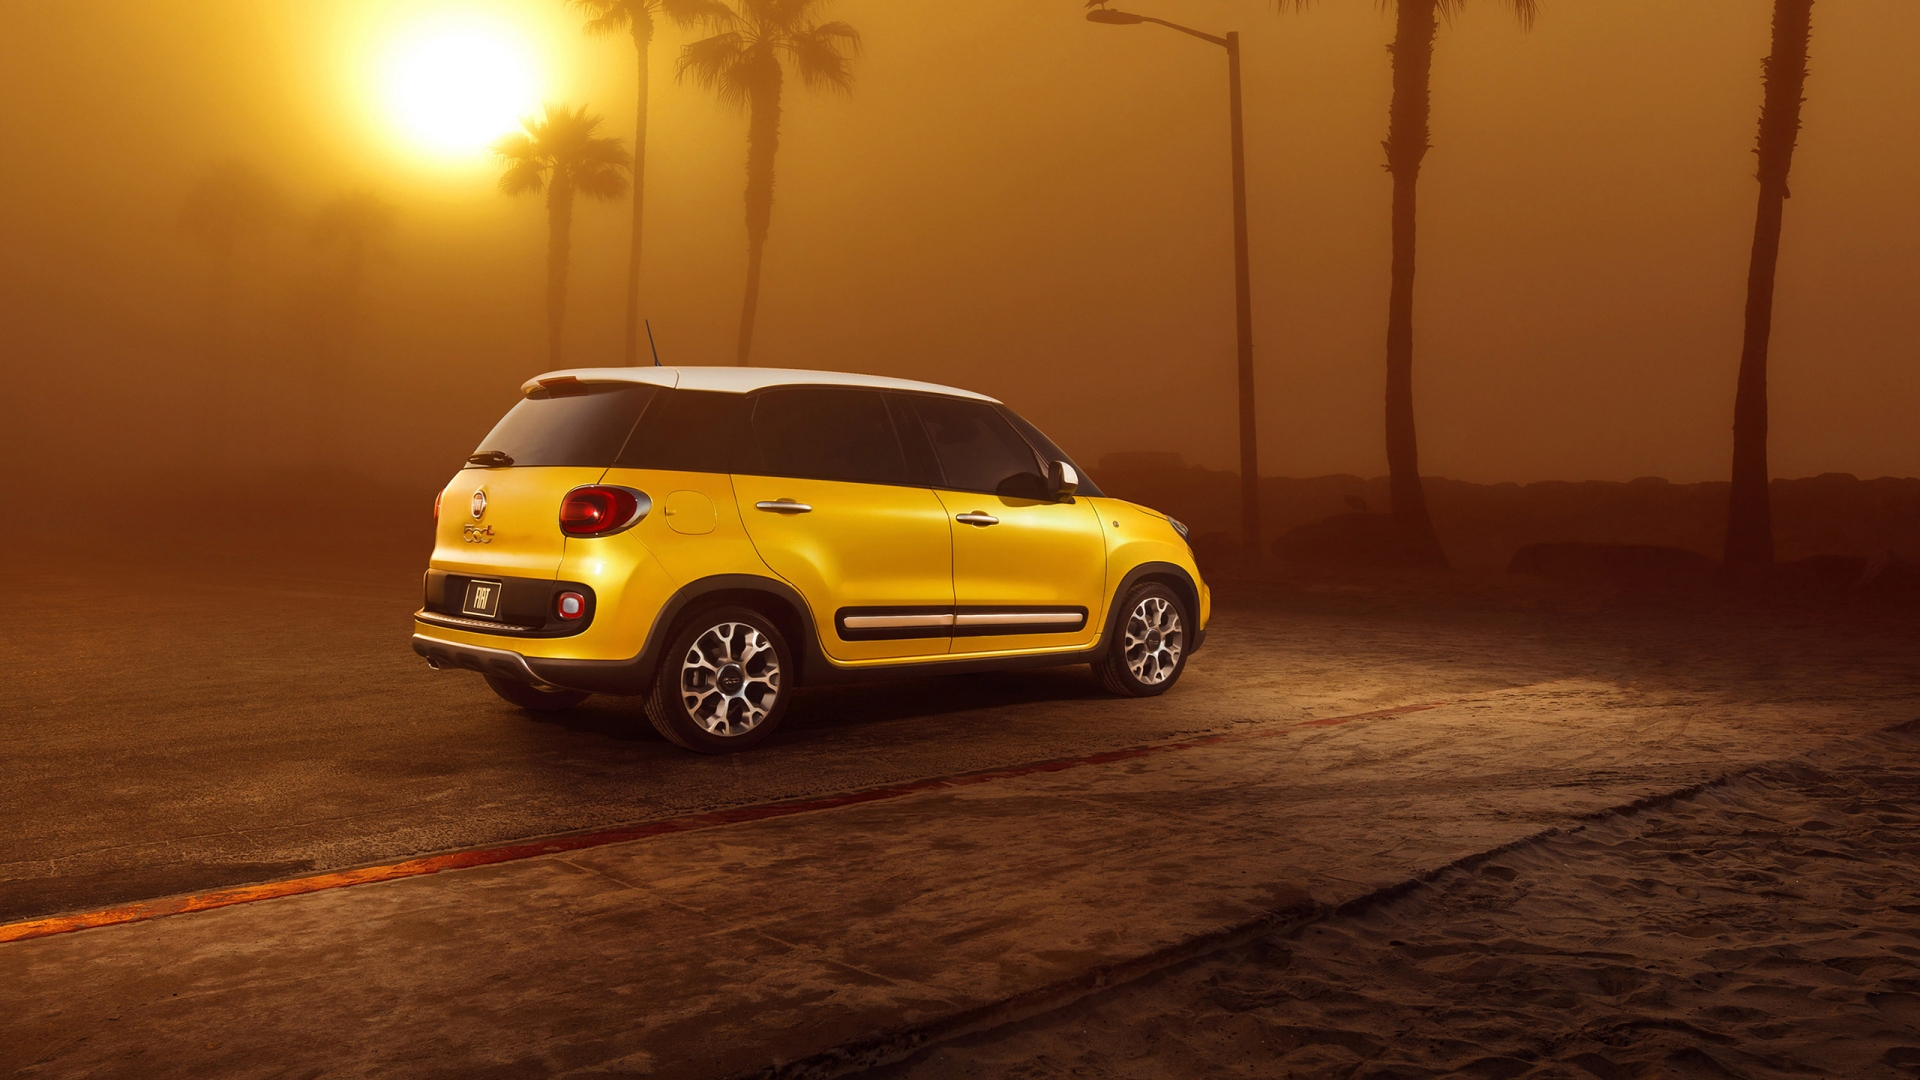 Sunset and Fiat 500L for 1920 x 1080 HDTV 1080p resolution